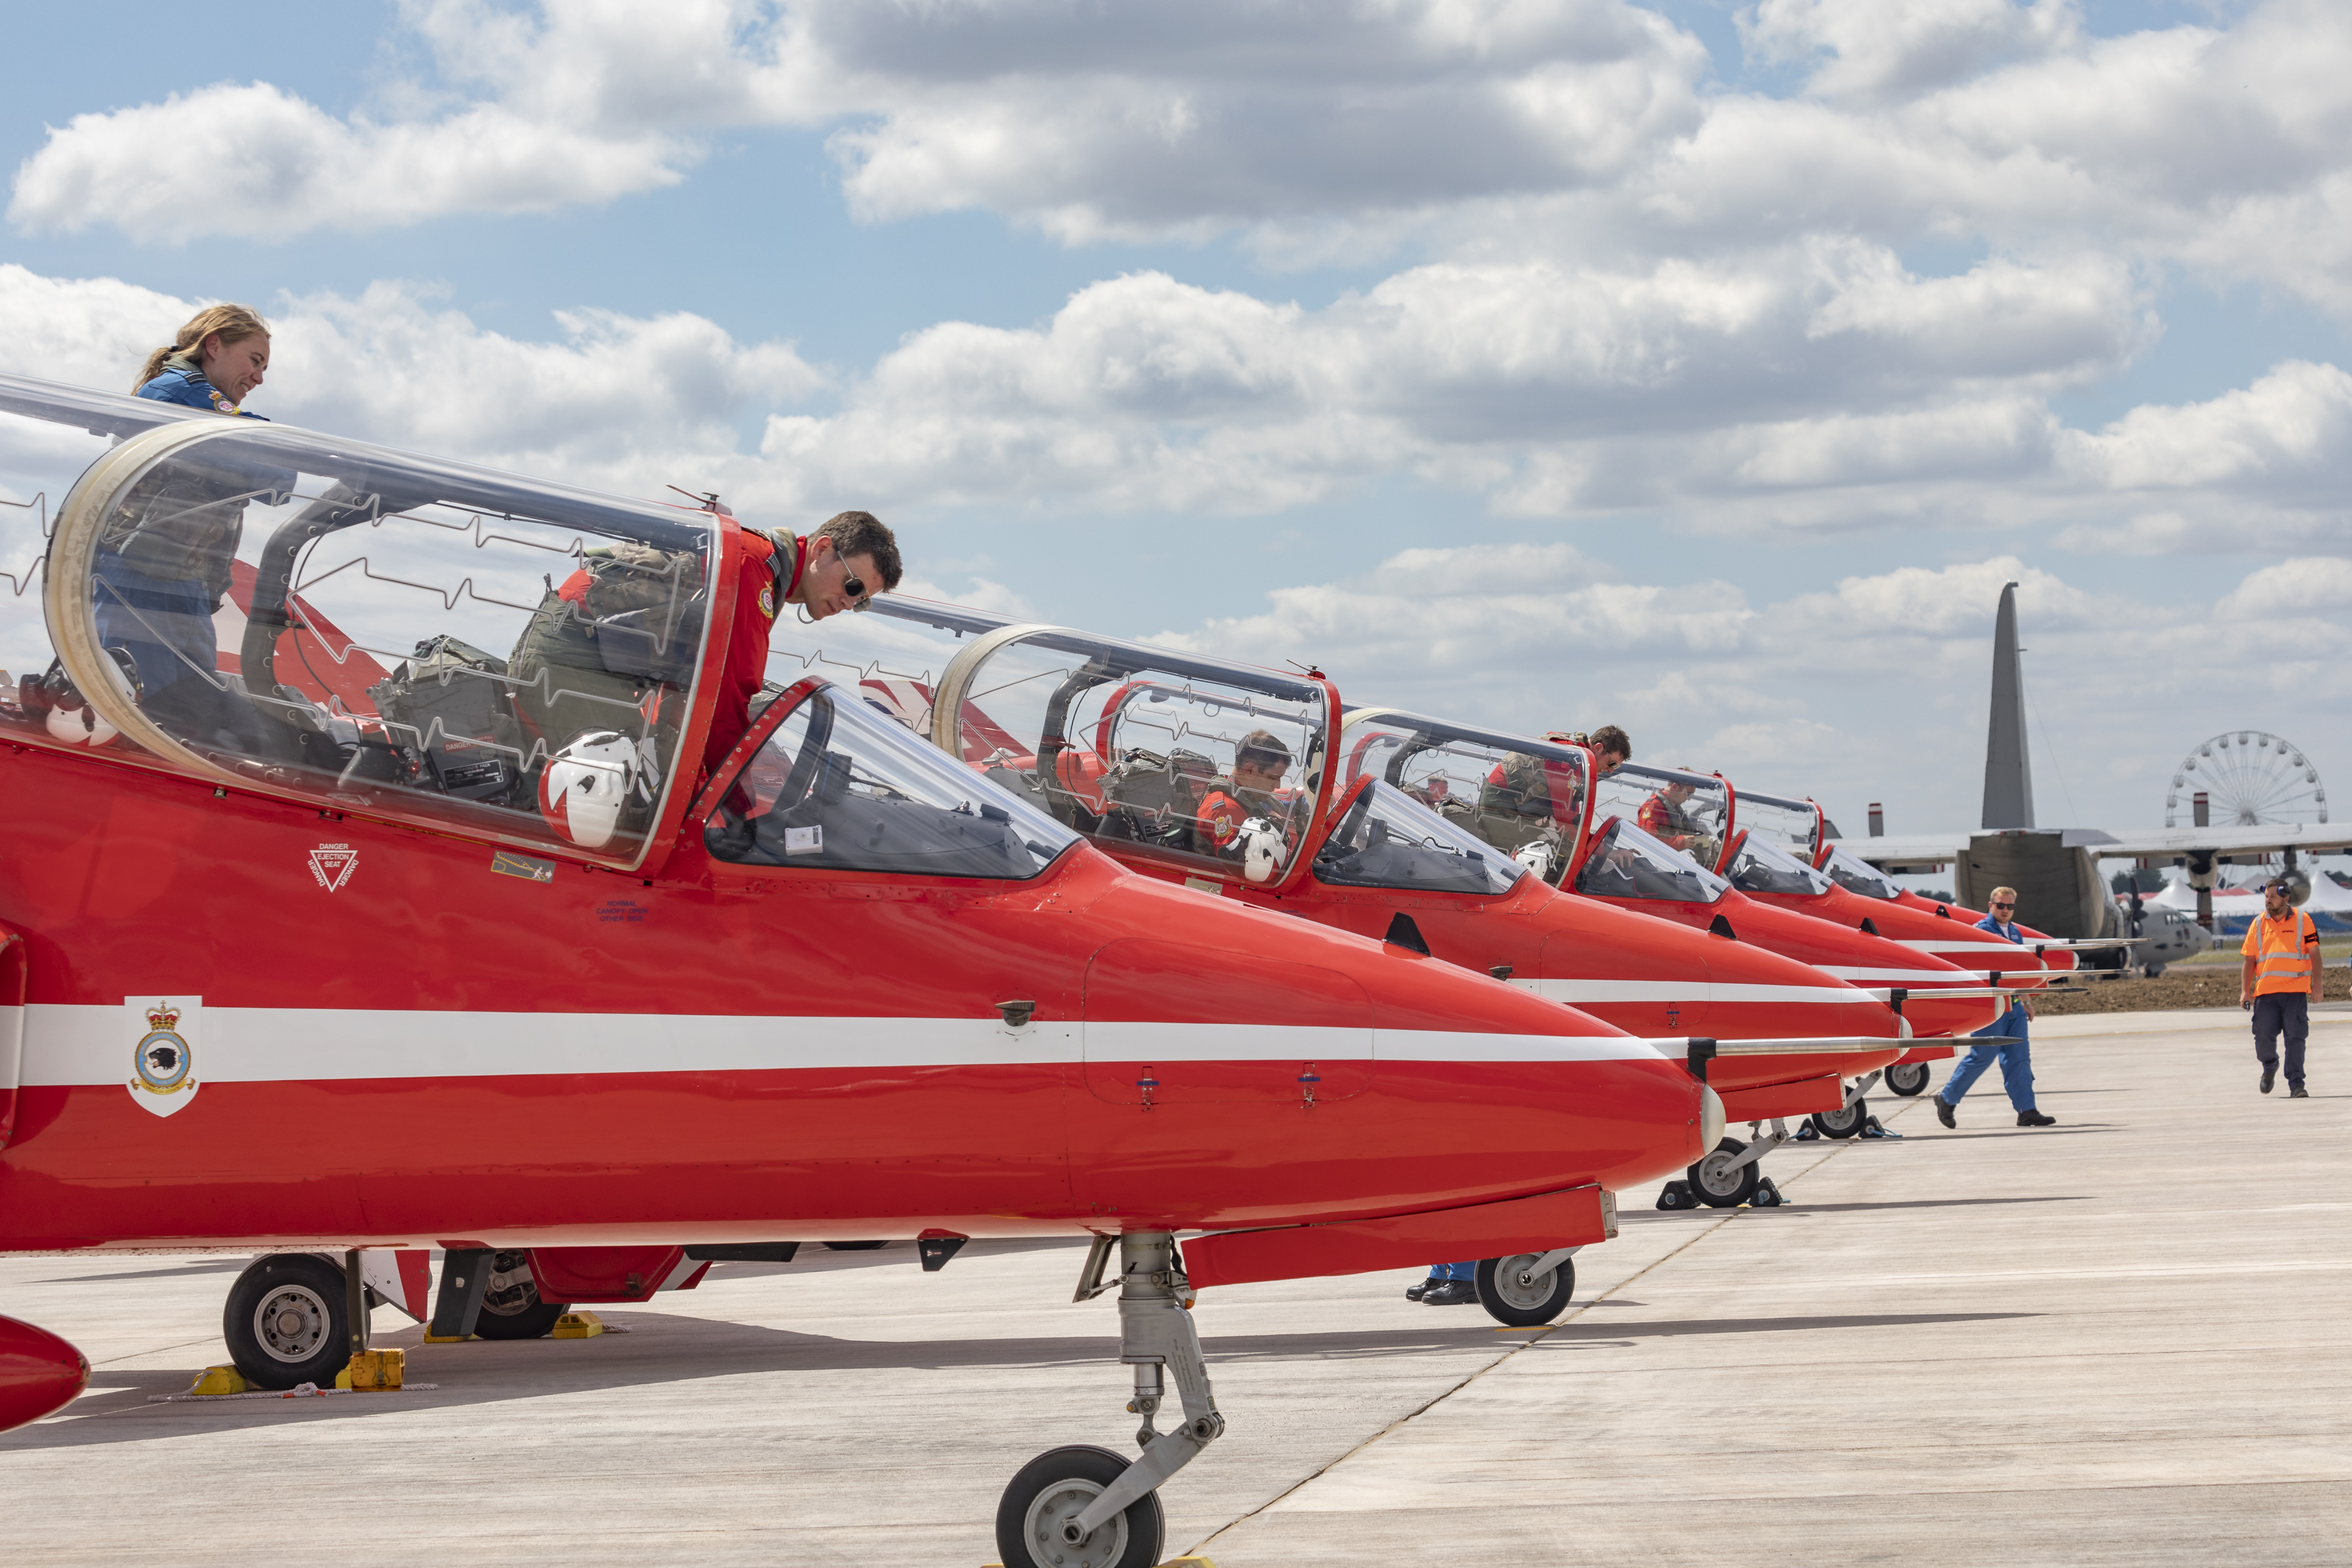 The Red Arrows returned to the Royal Air International Air Tattoo in July. Image by AS1 Abigail Drewett.